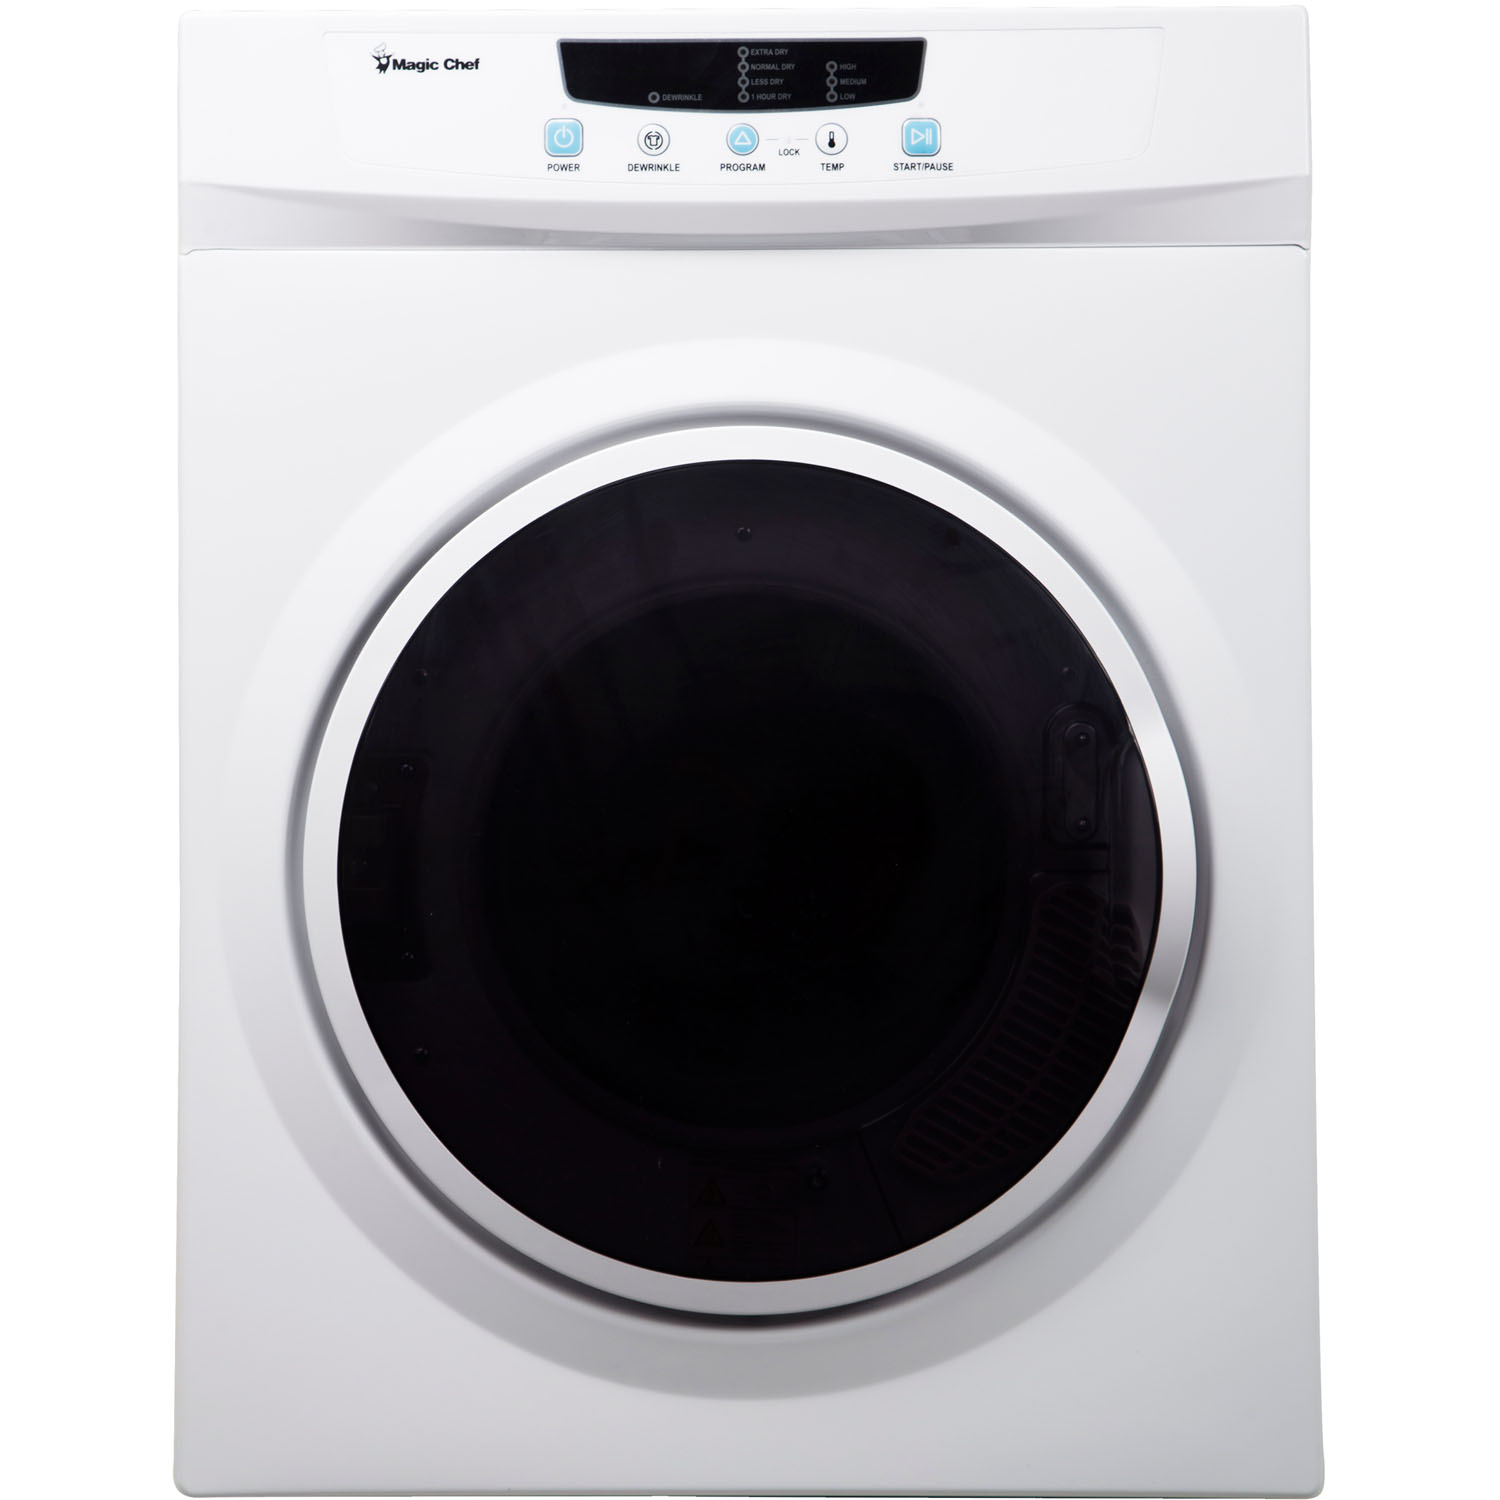 Magic Chef 3.5 cu. ft. Compact Electric Dryer, White - image 1 of 7